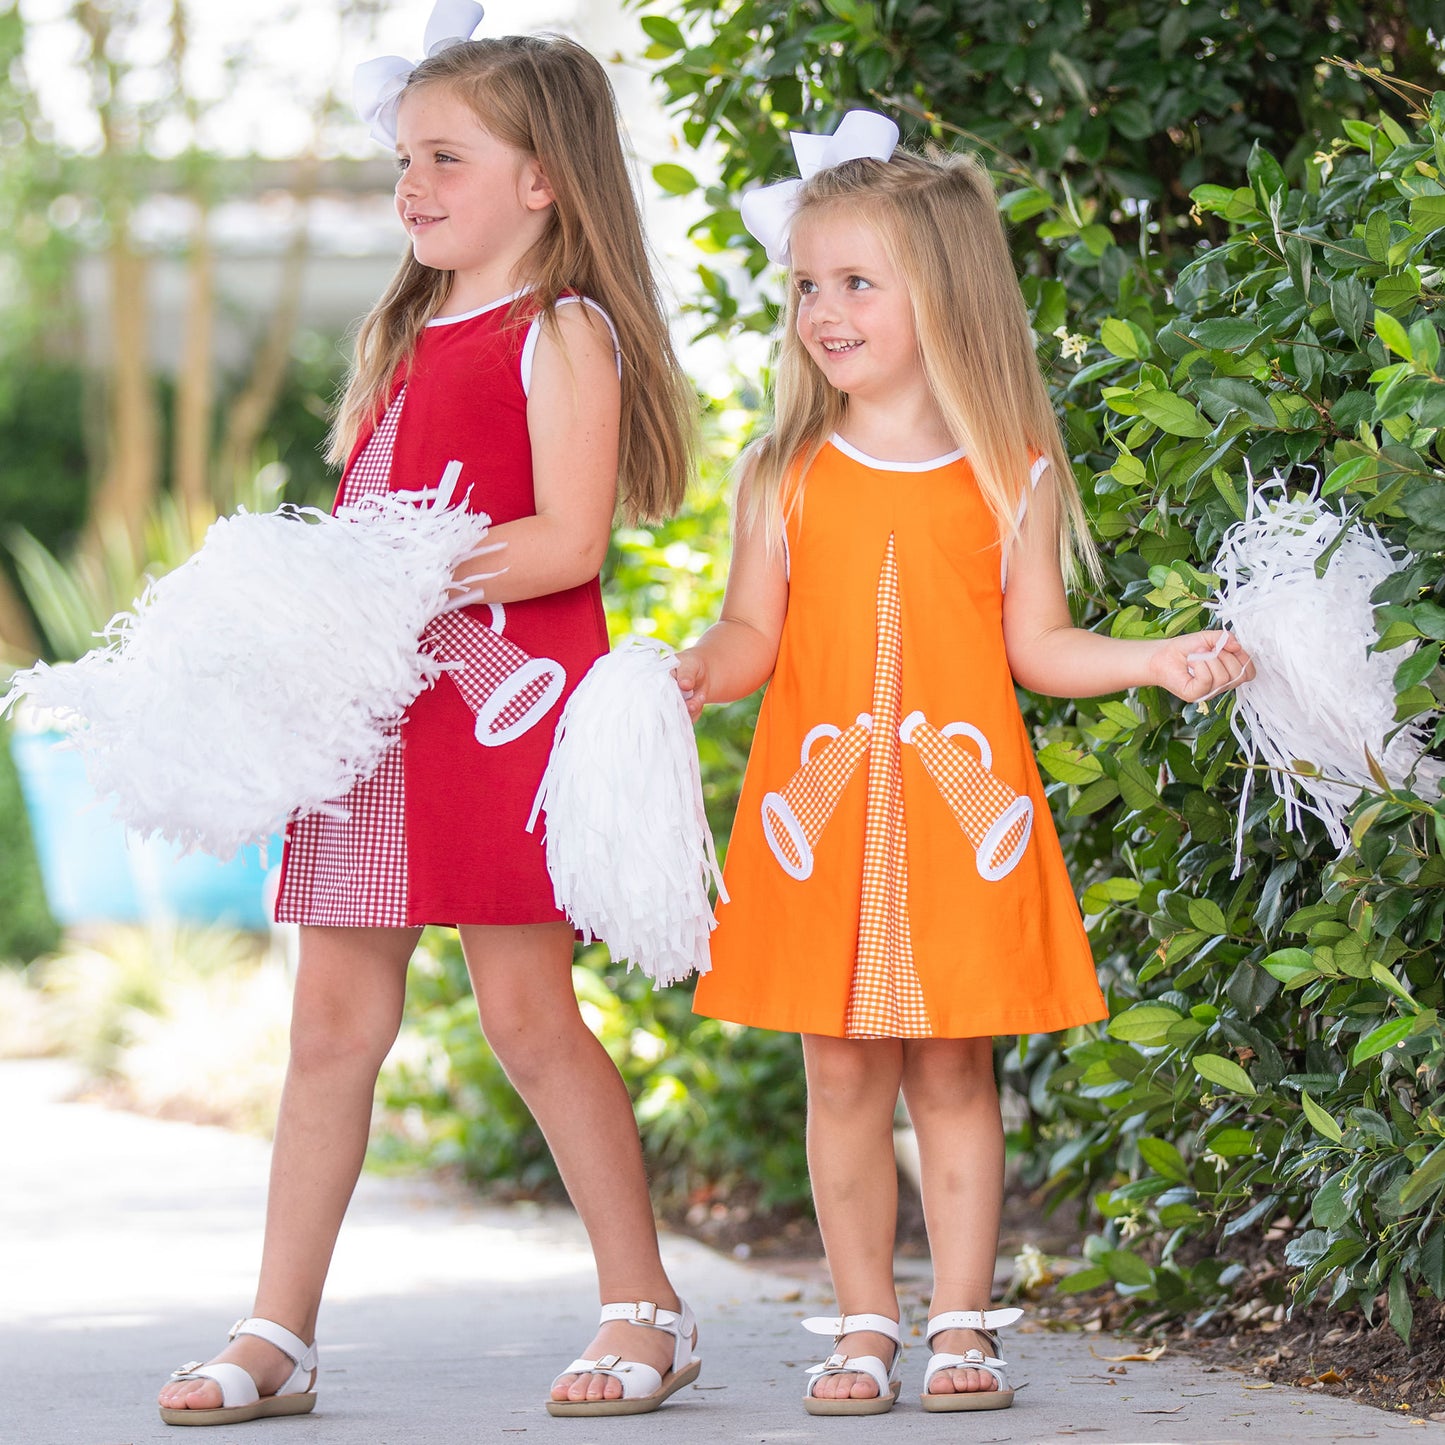 little girls in red and orange dresses with megaphones and pom poms